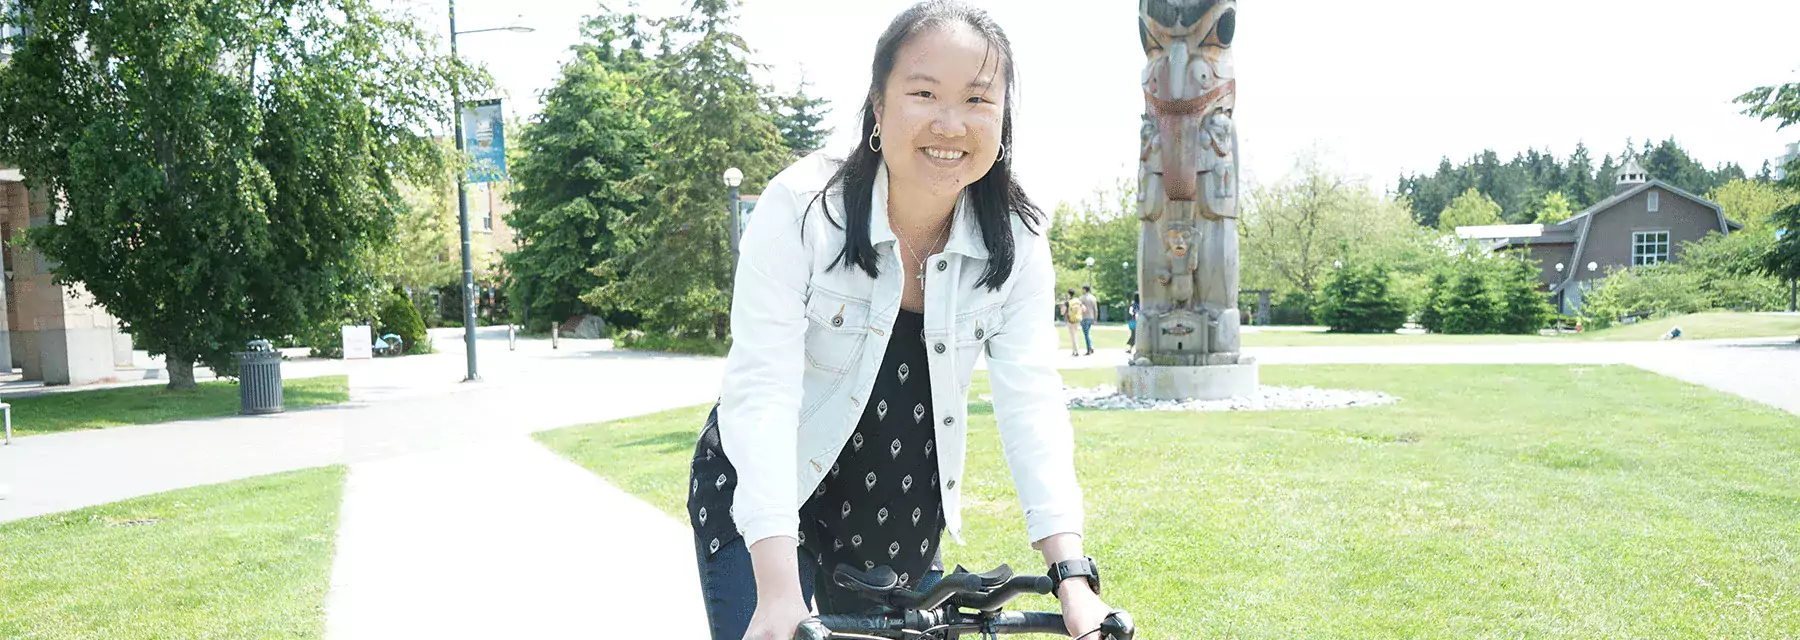 Jacqueline Chong Master of Data Science Vancouver Header 1